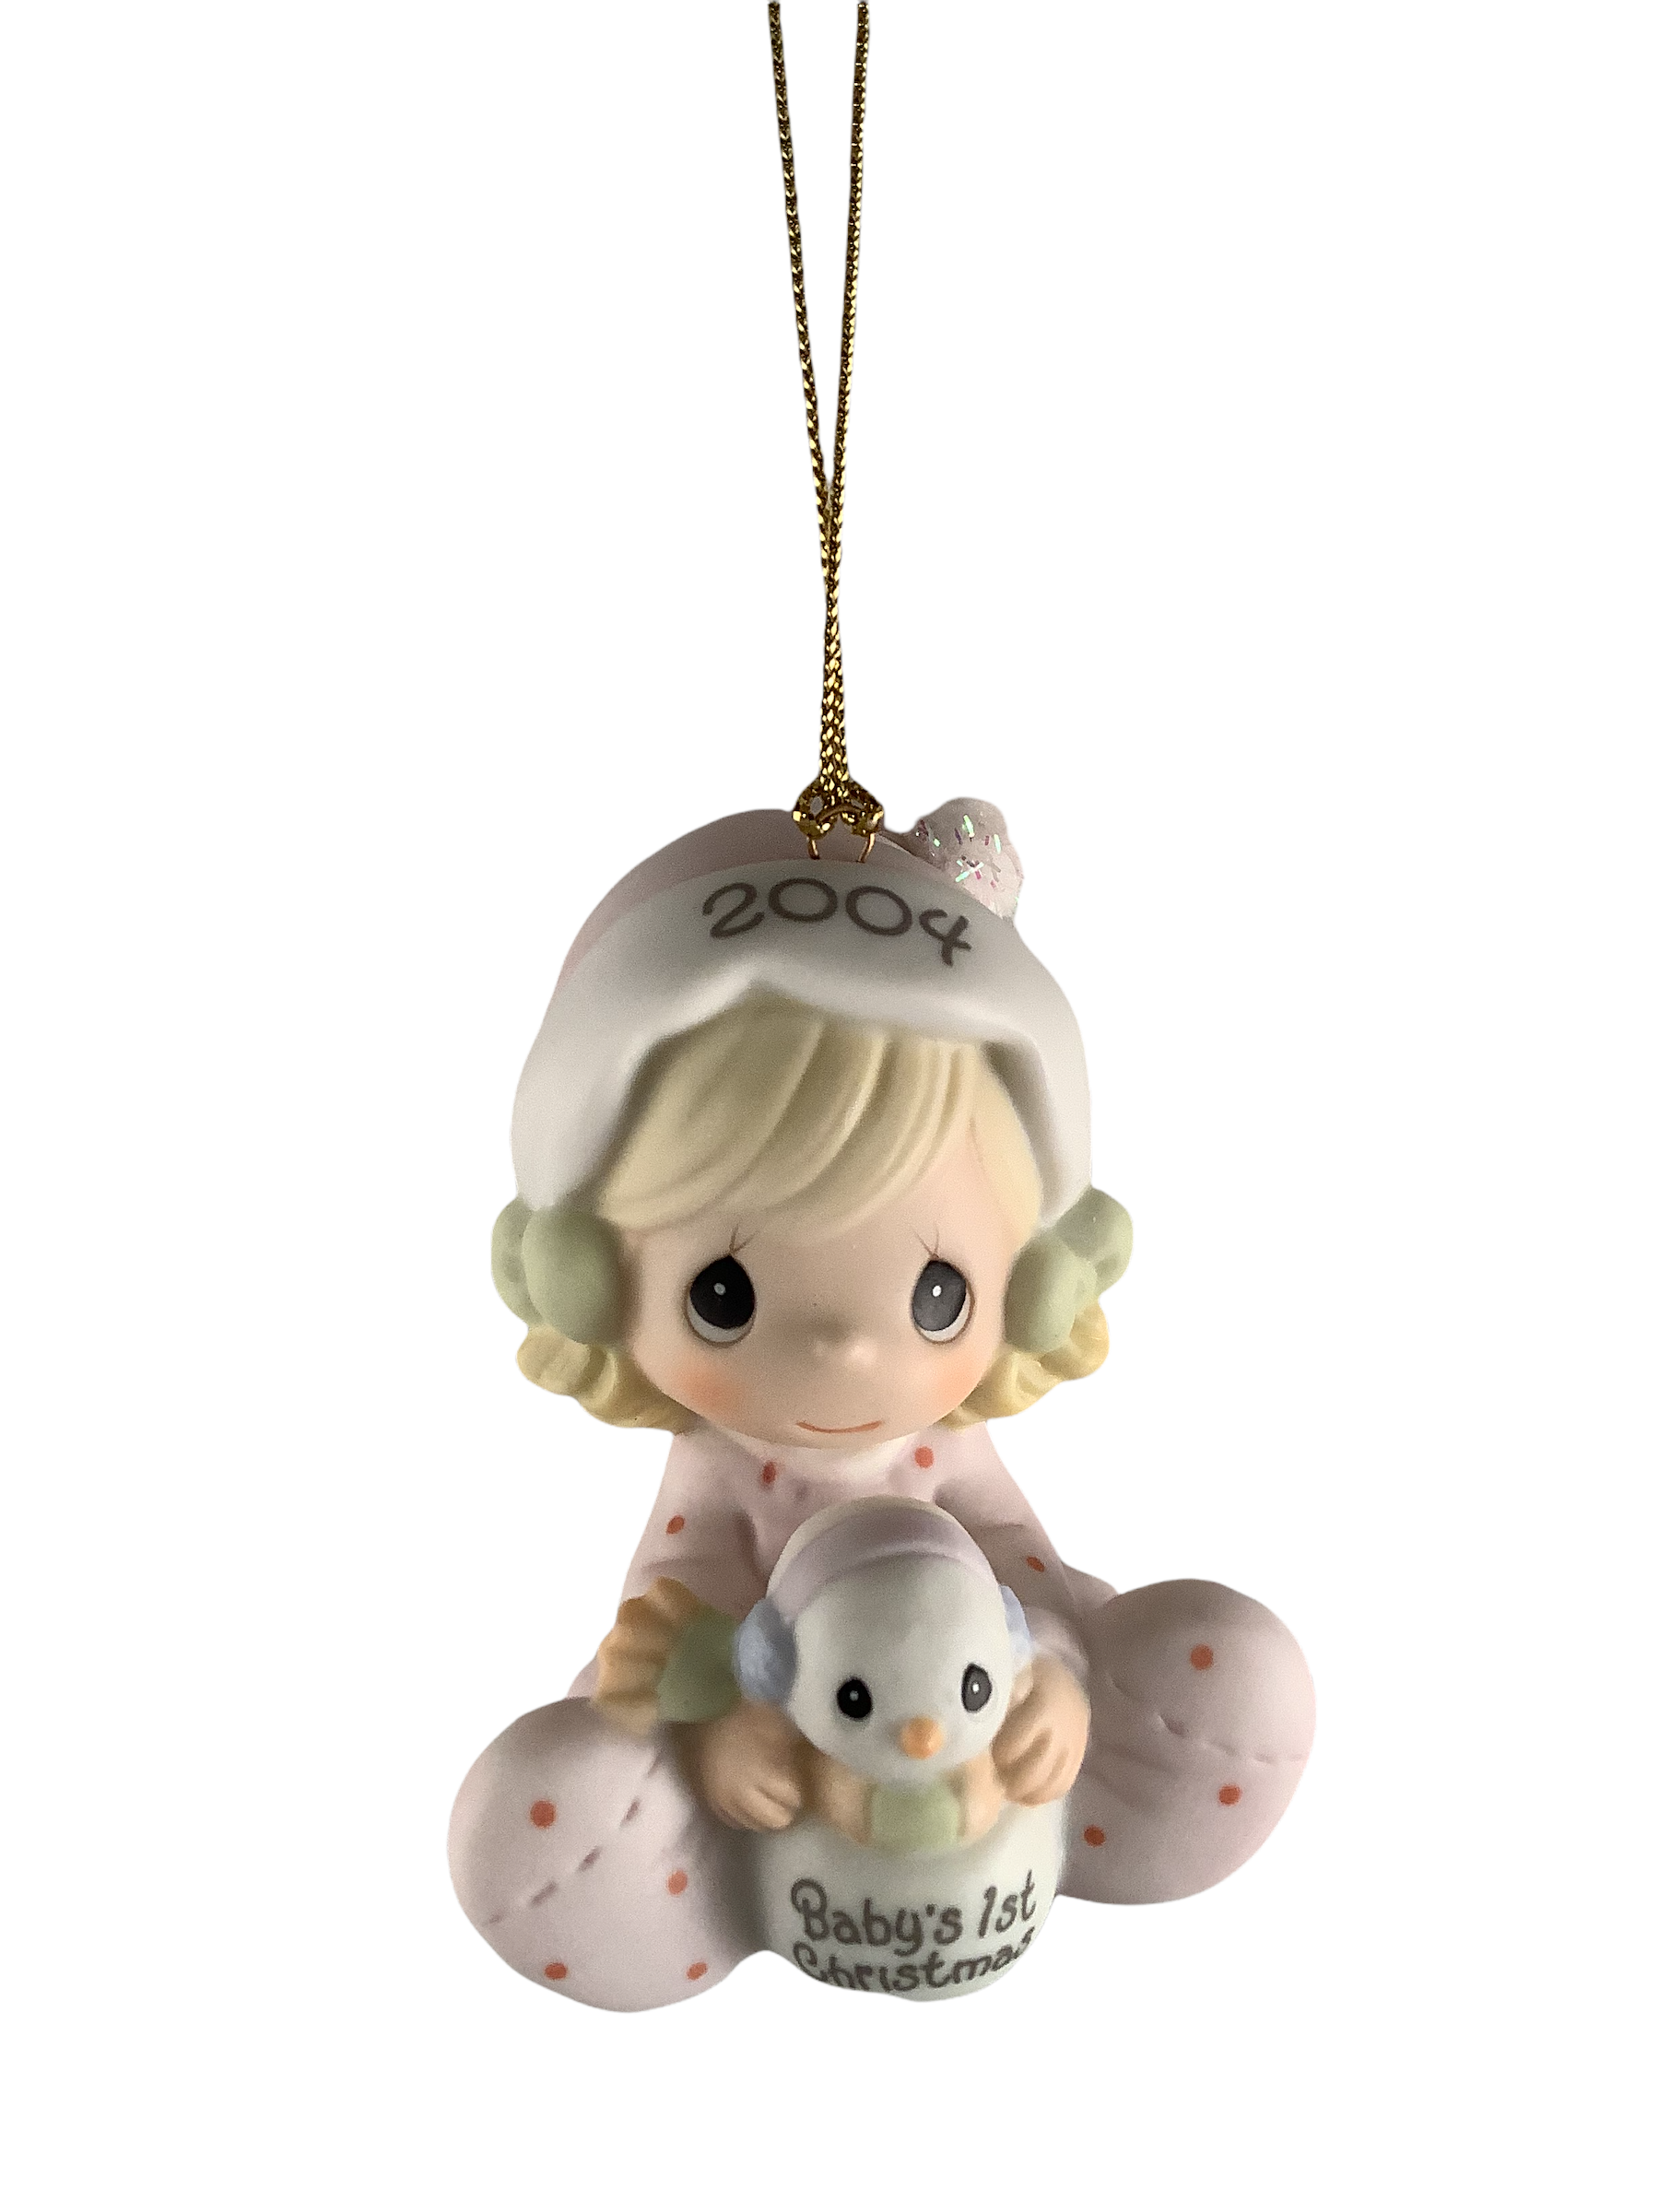 Baby's First Christmas 2004 (Girl) - Precious Moment Ornament 